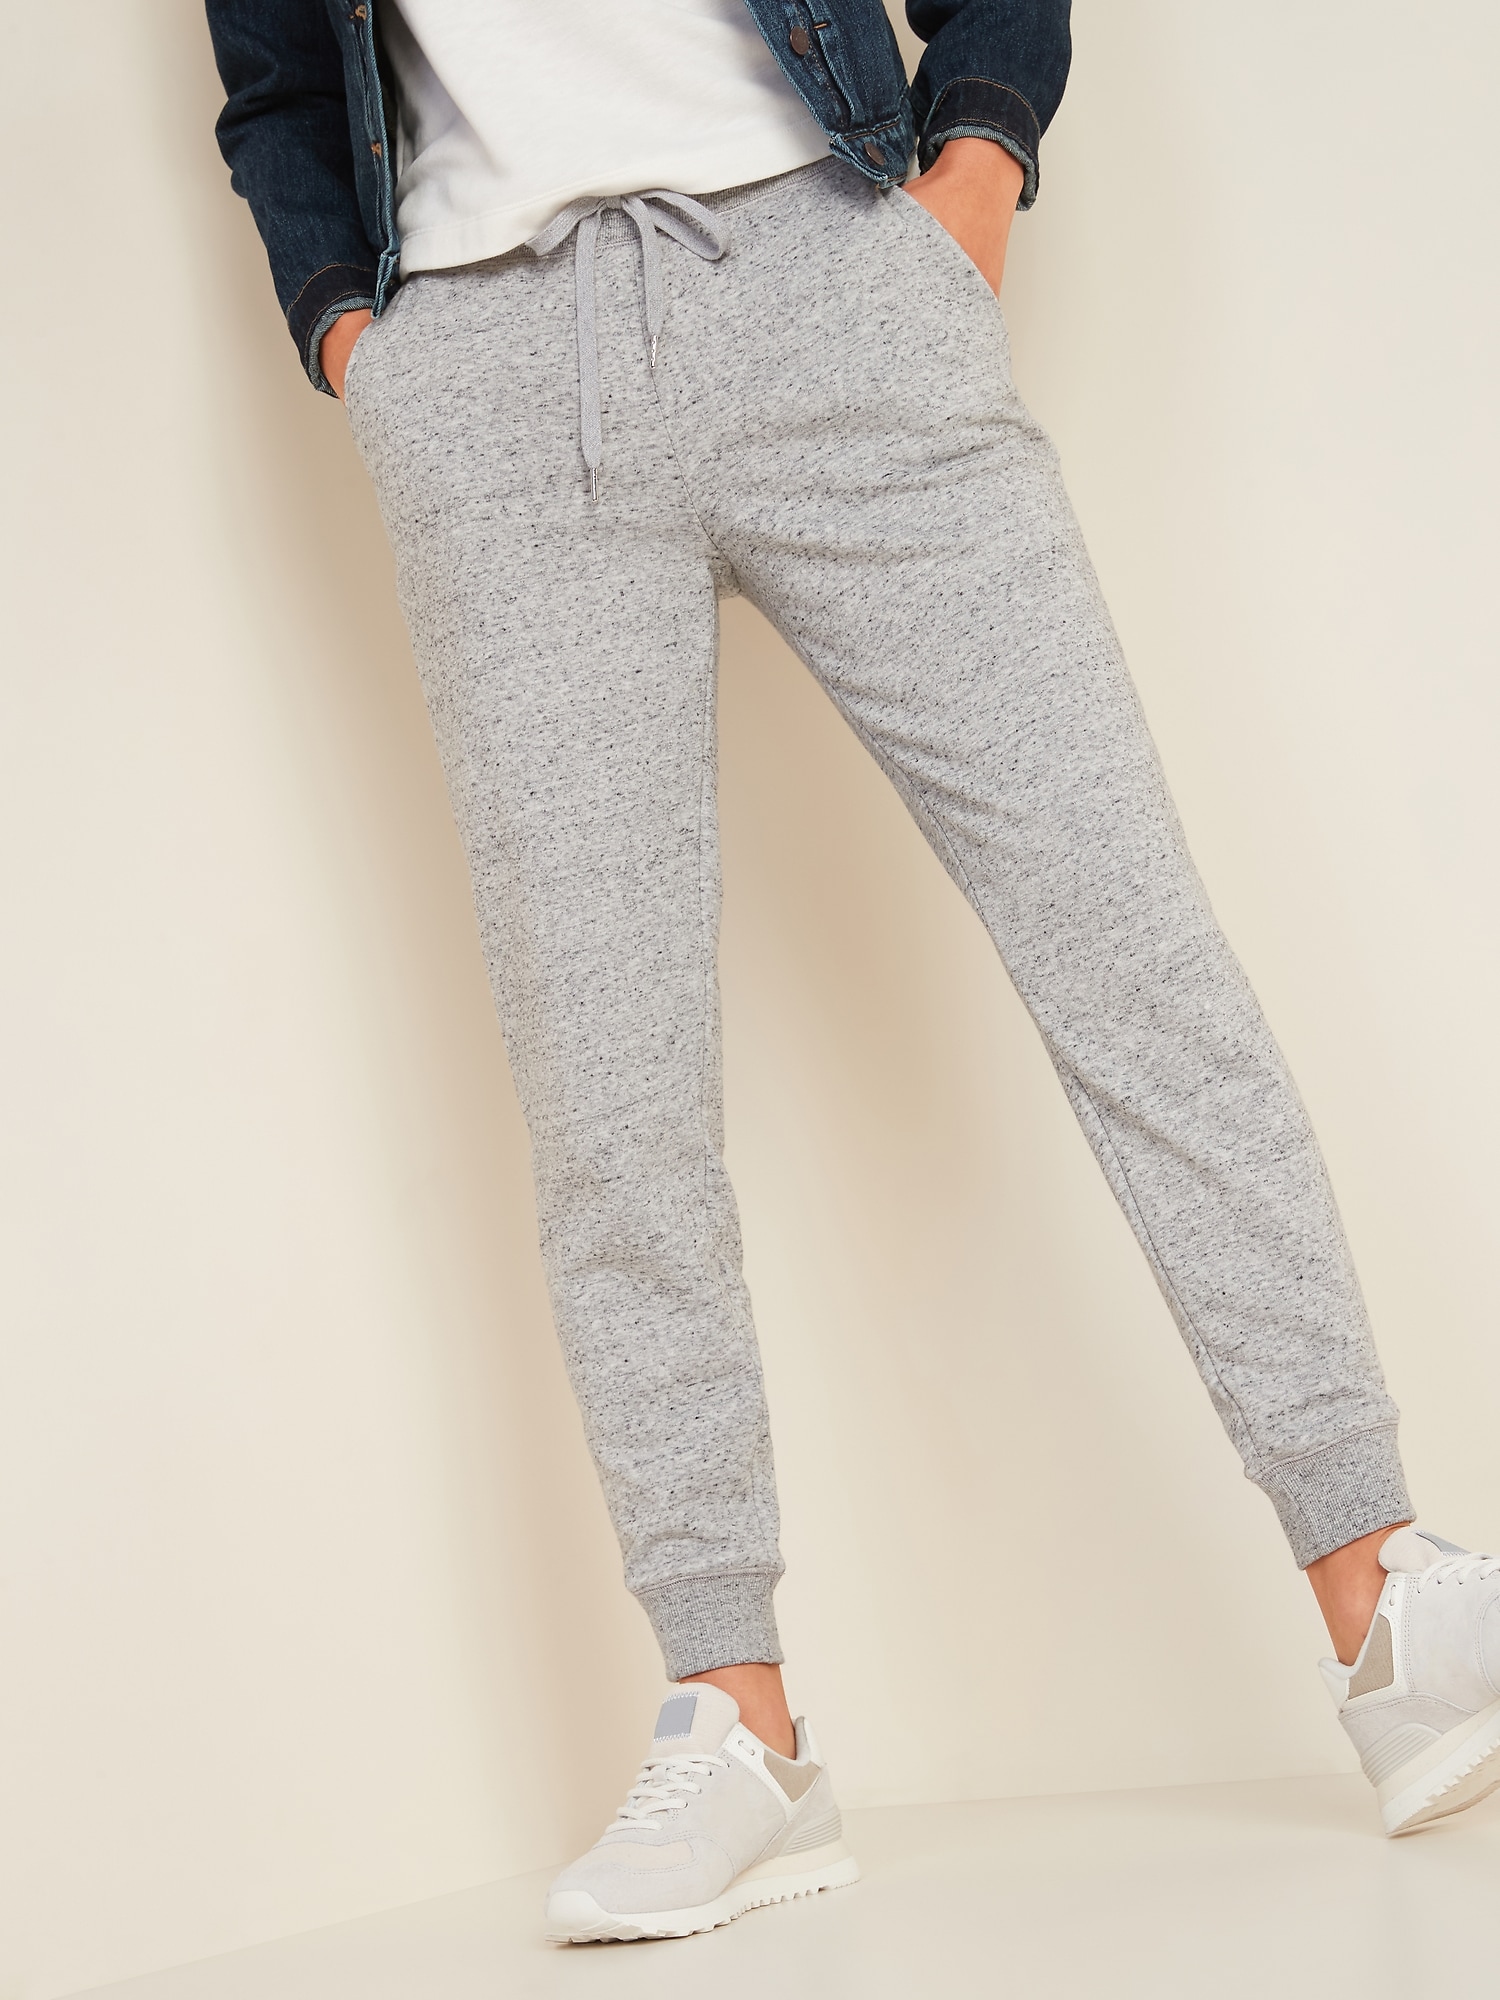 Mid-Rise Vintage Street Joggers for Women, Old Navy